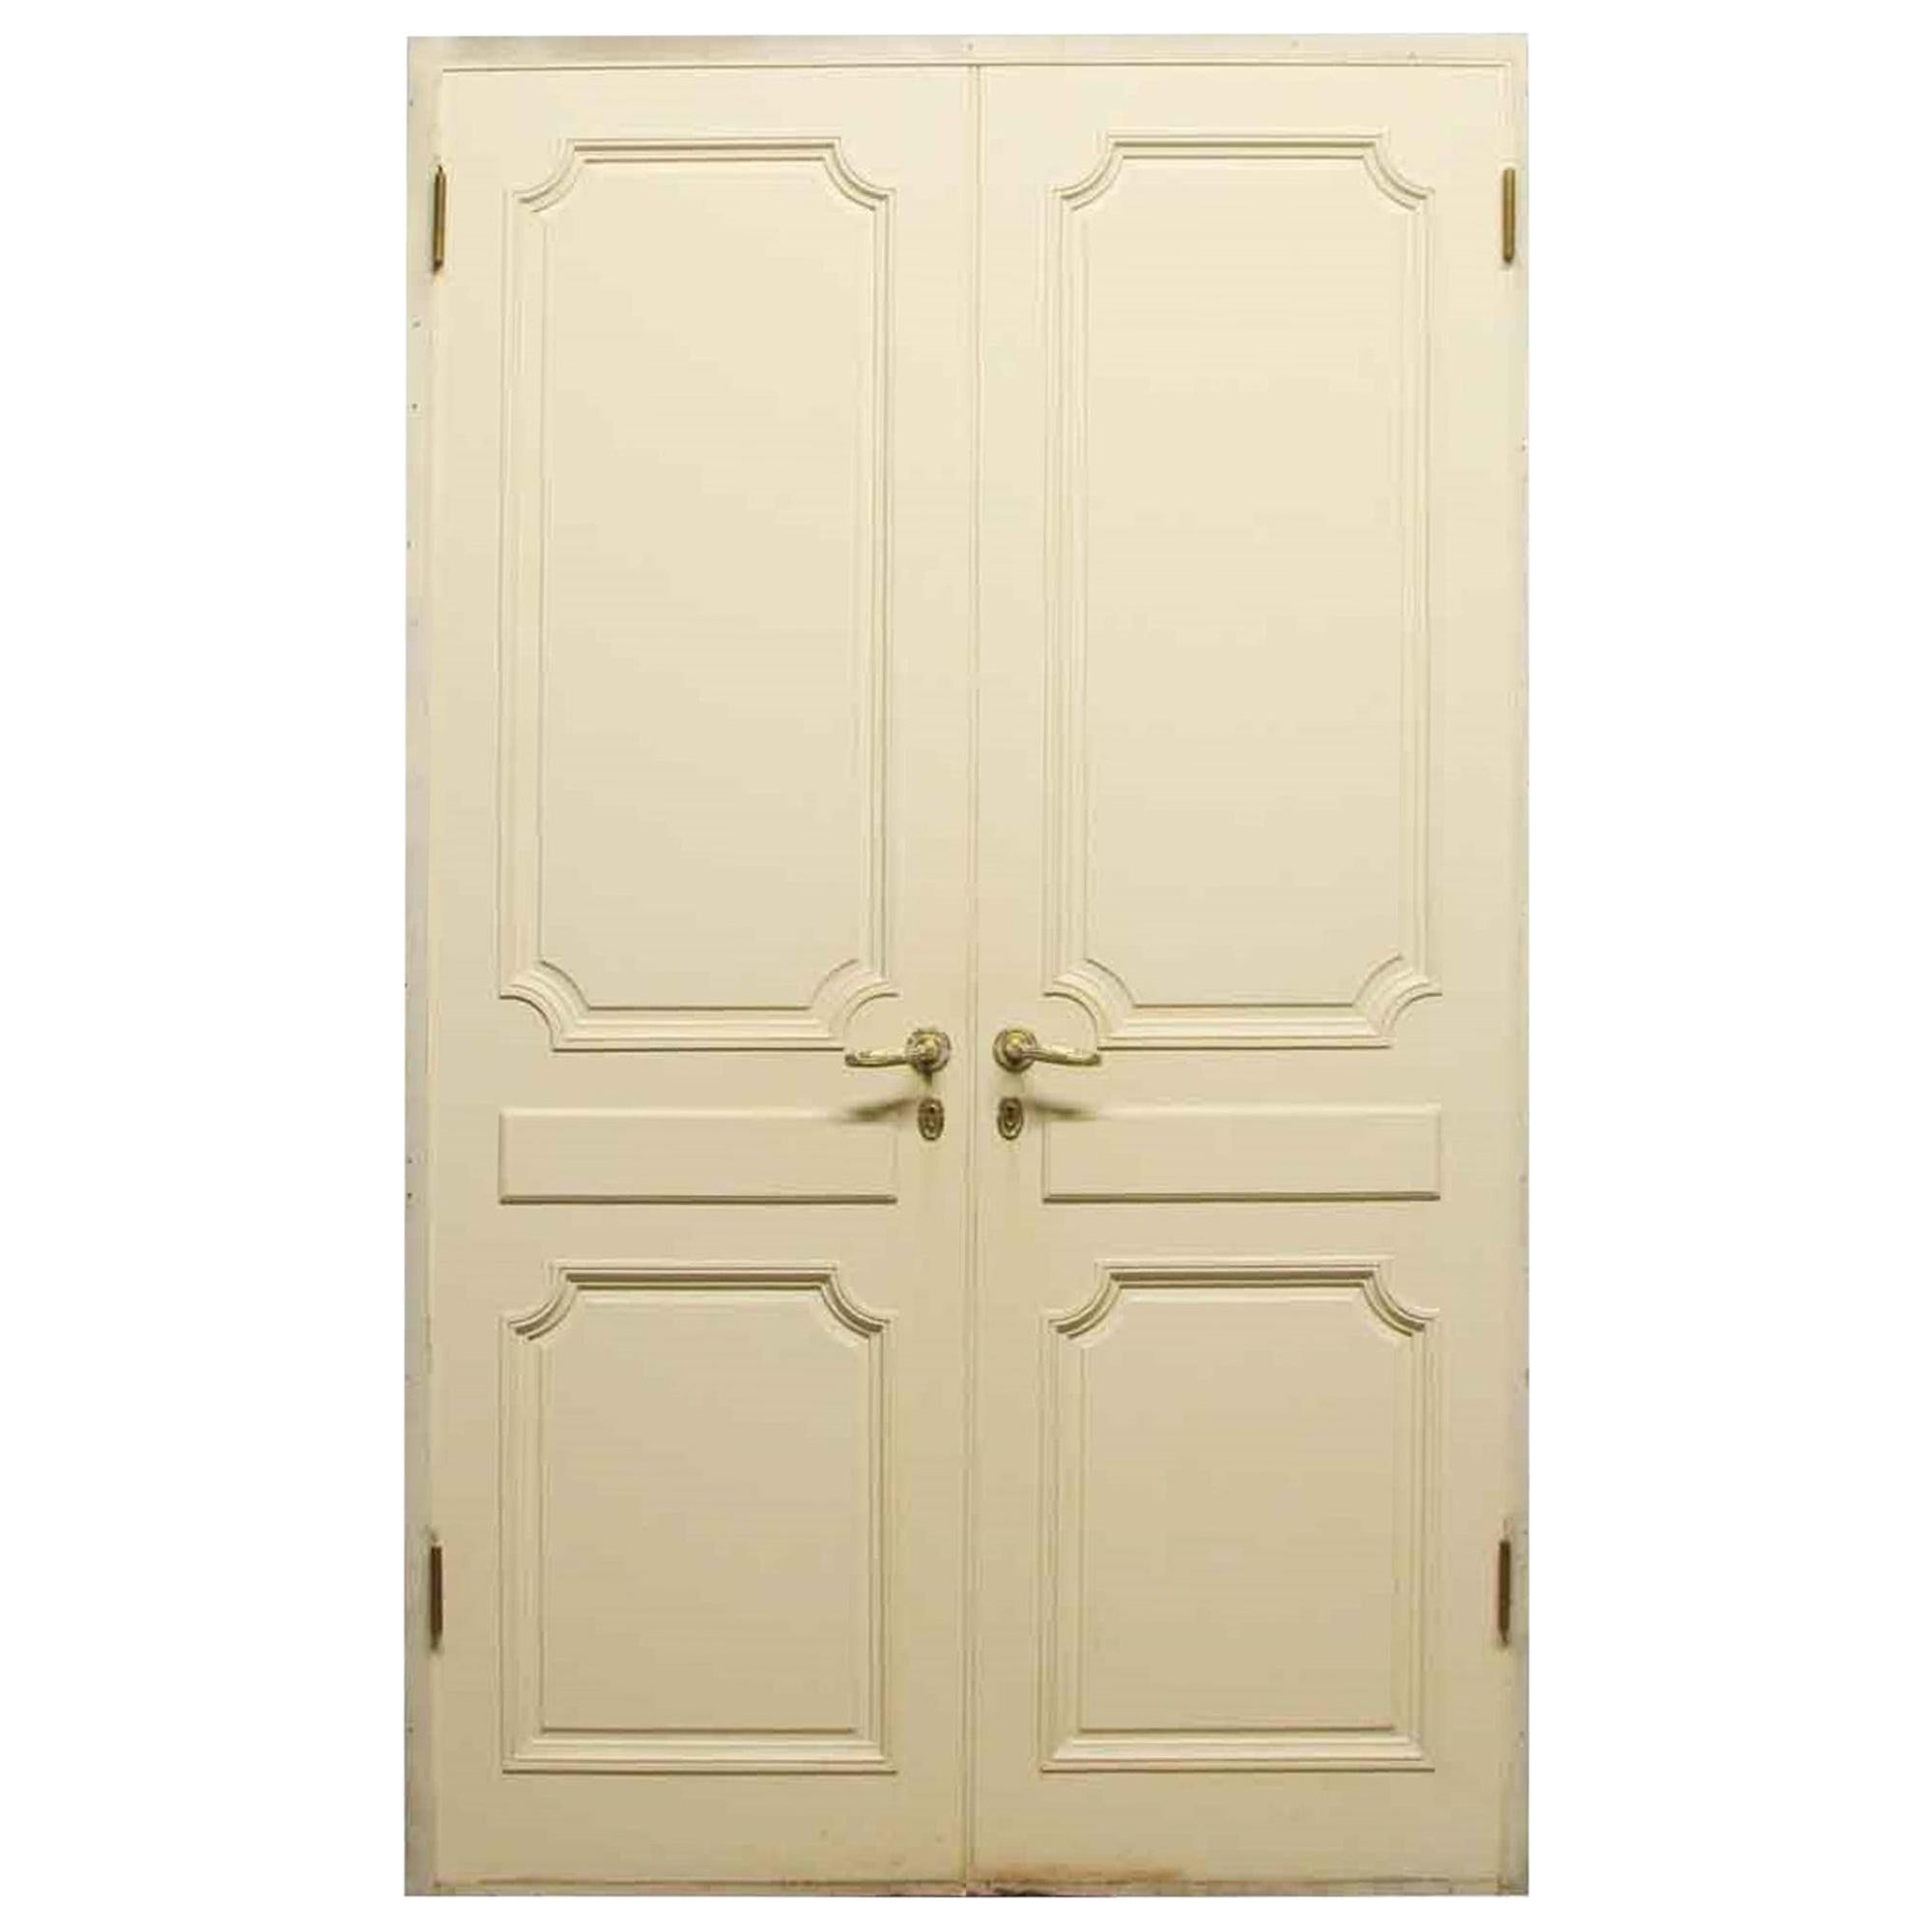 1980s Single "Pair of French Provincial Faux Door" Panel